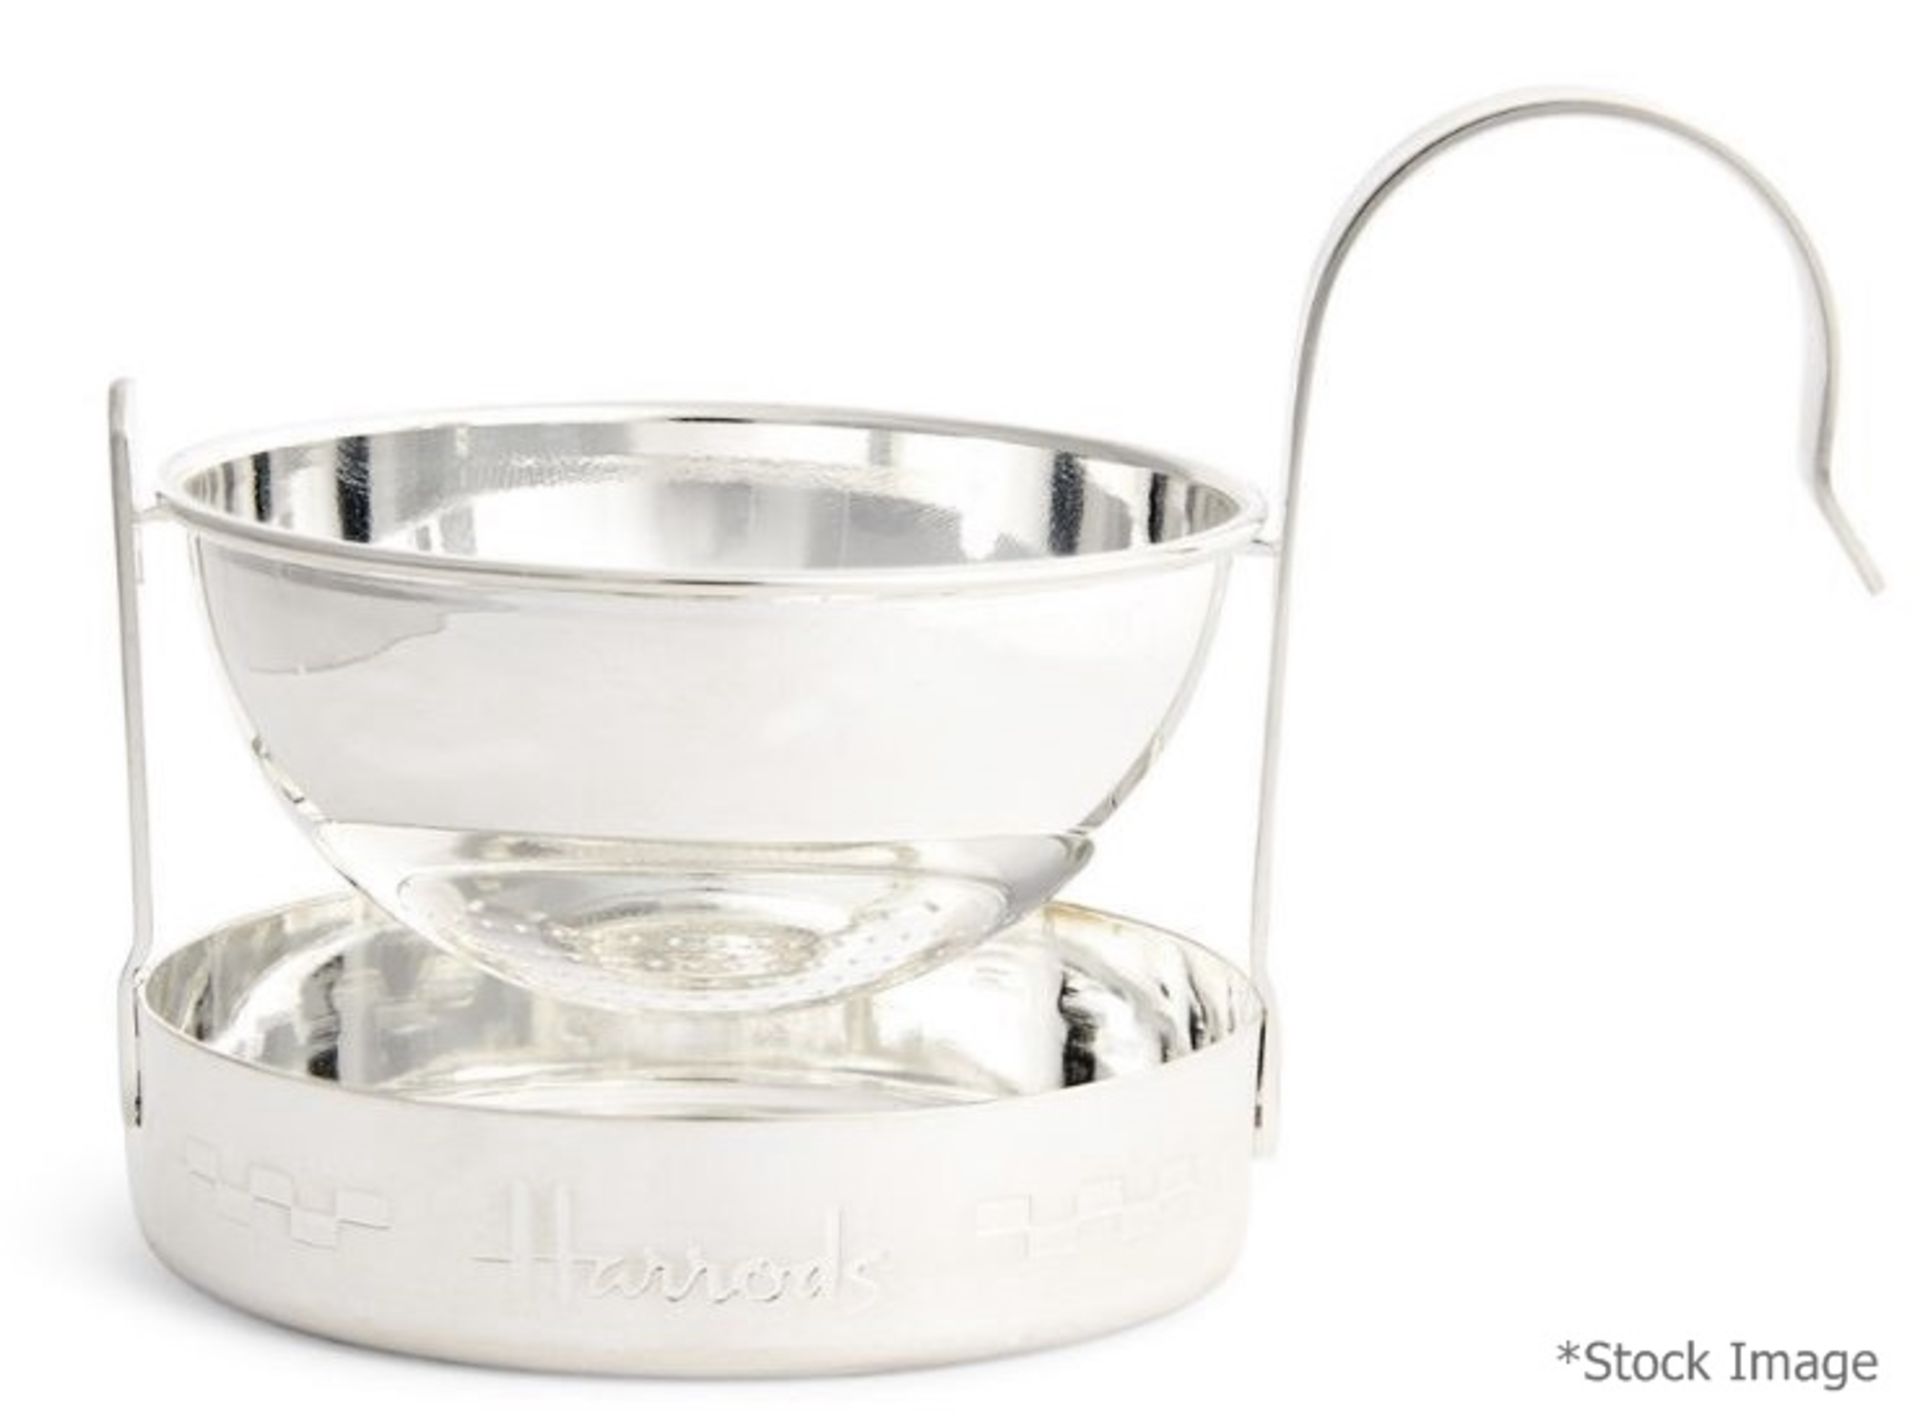 1 x HARRODS Silver-Plated Revolving Strainer - Unused Boxed Stock - Ref: HAS578/FEB22/WH2/C6 - CL987